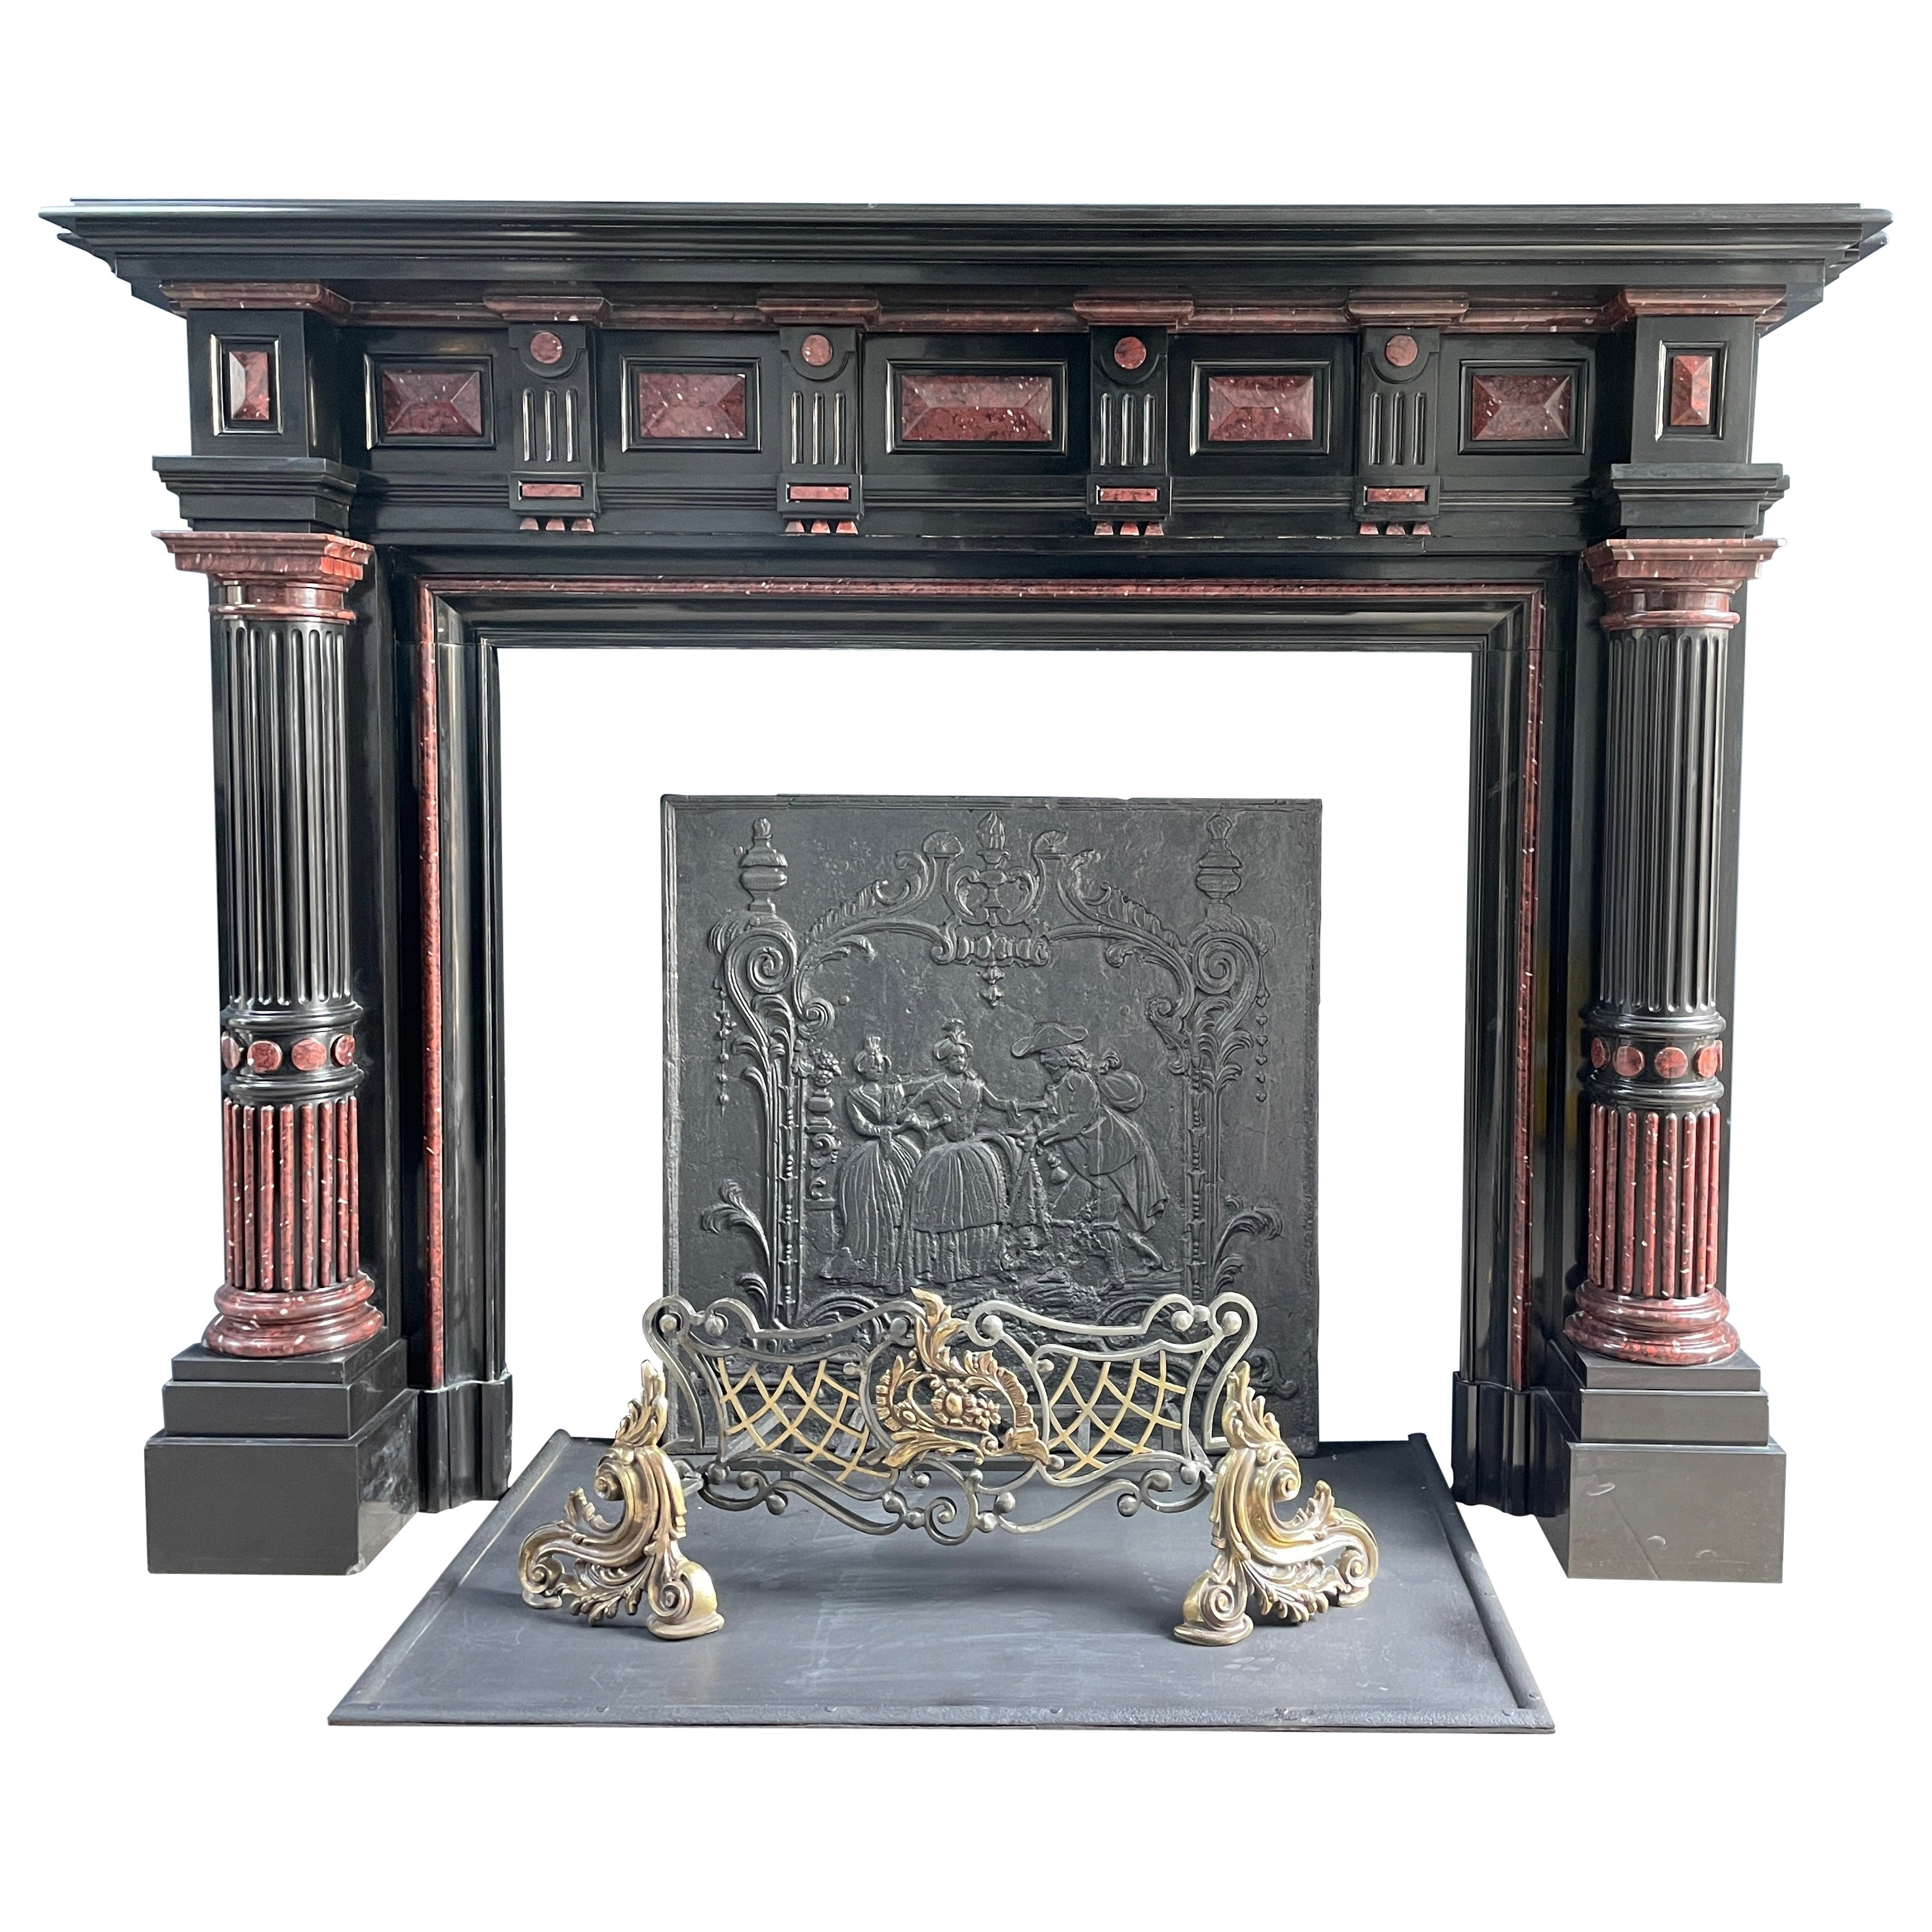 Incredible Detailed Black and Rouge Marble Antique Fireplace Surround